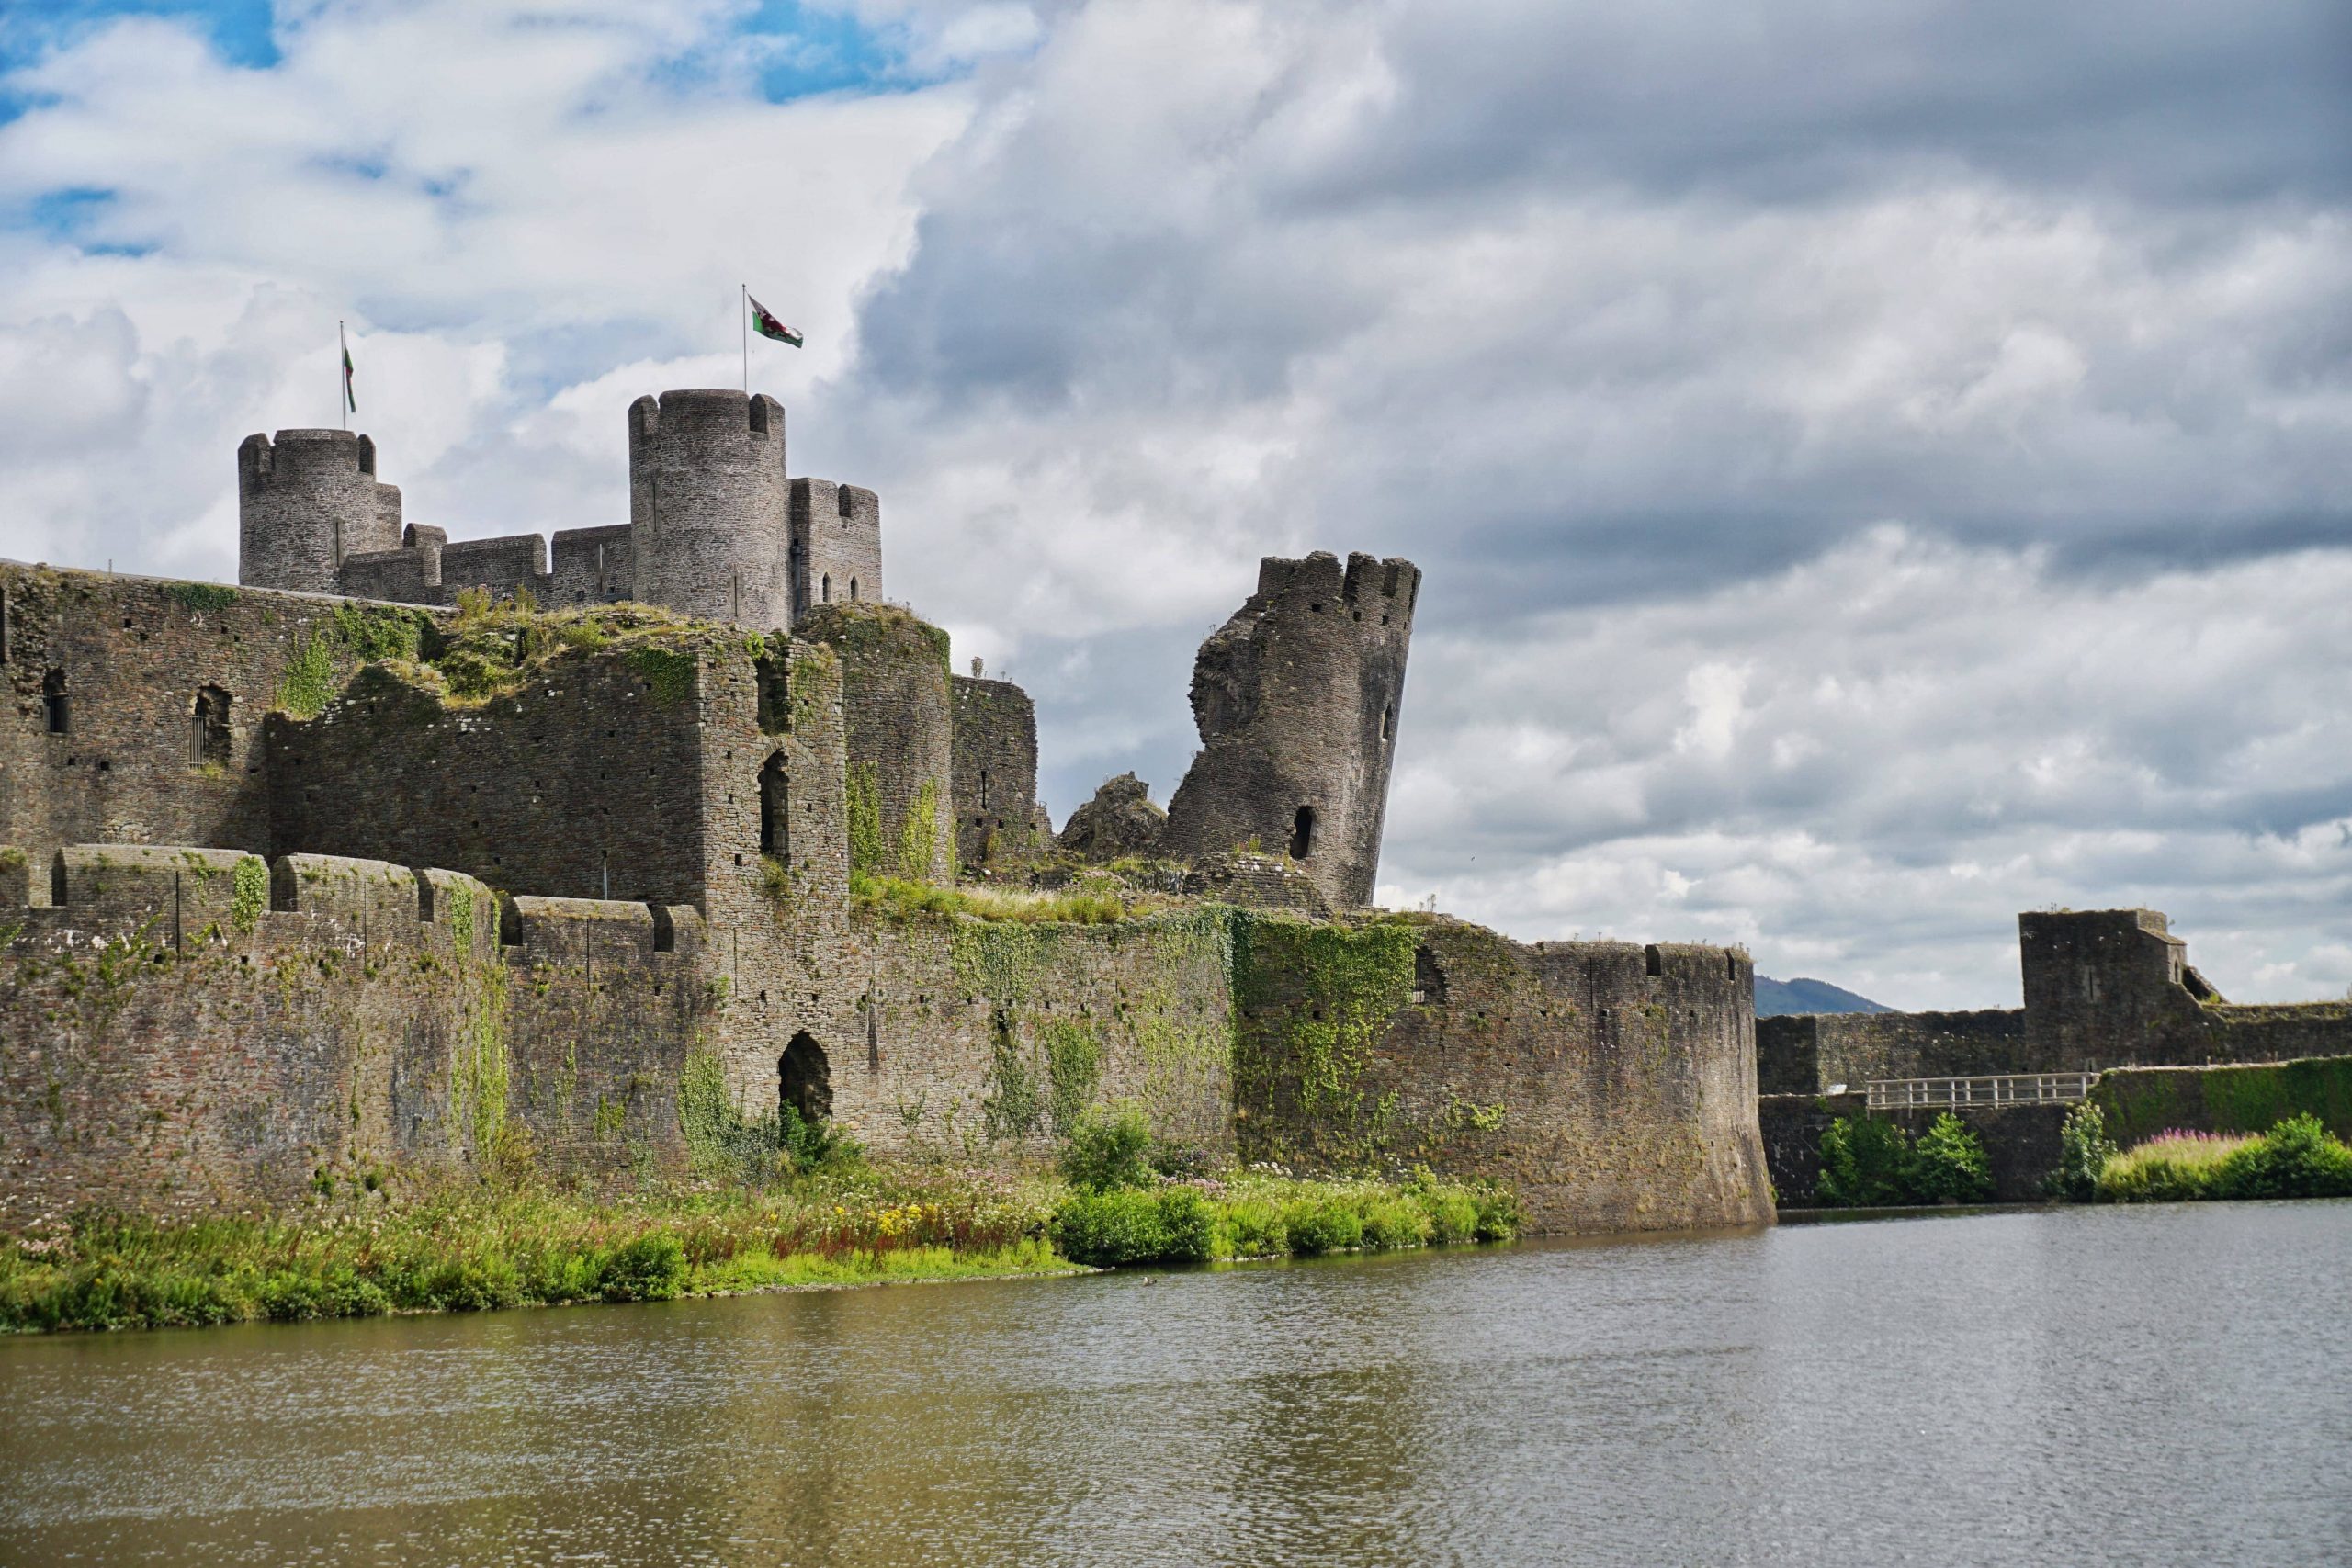 Caerphilly Castle leaning tower